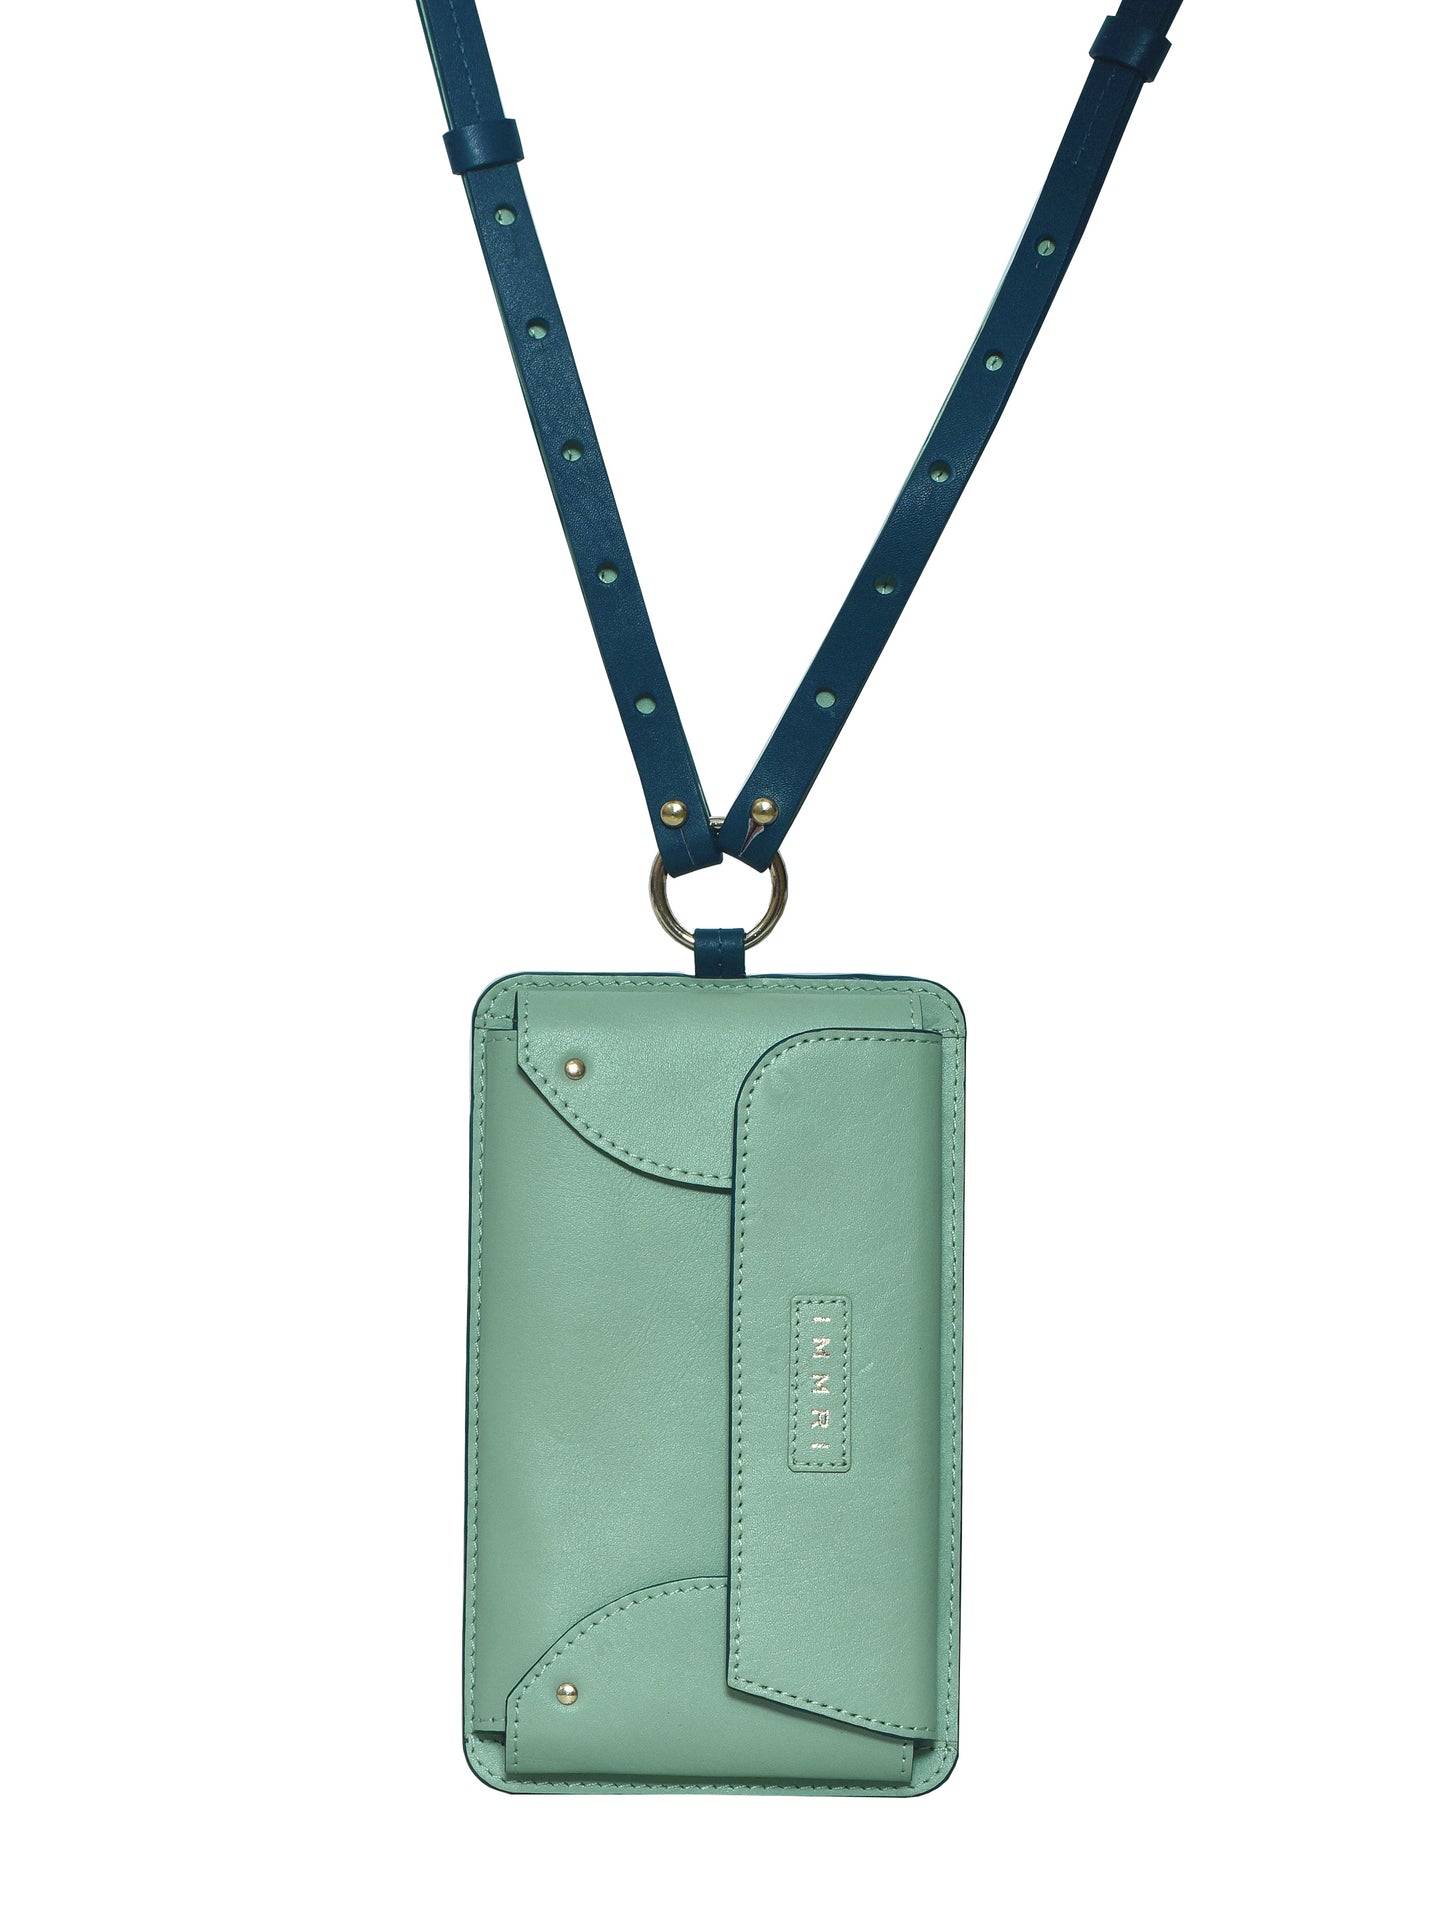 Workation Mobile Sling - Mint Green